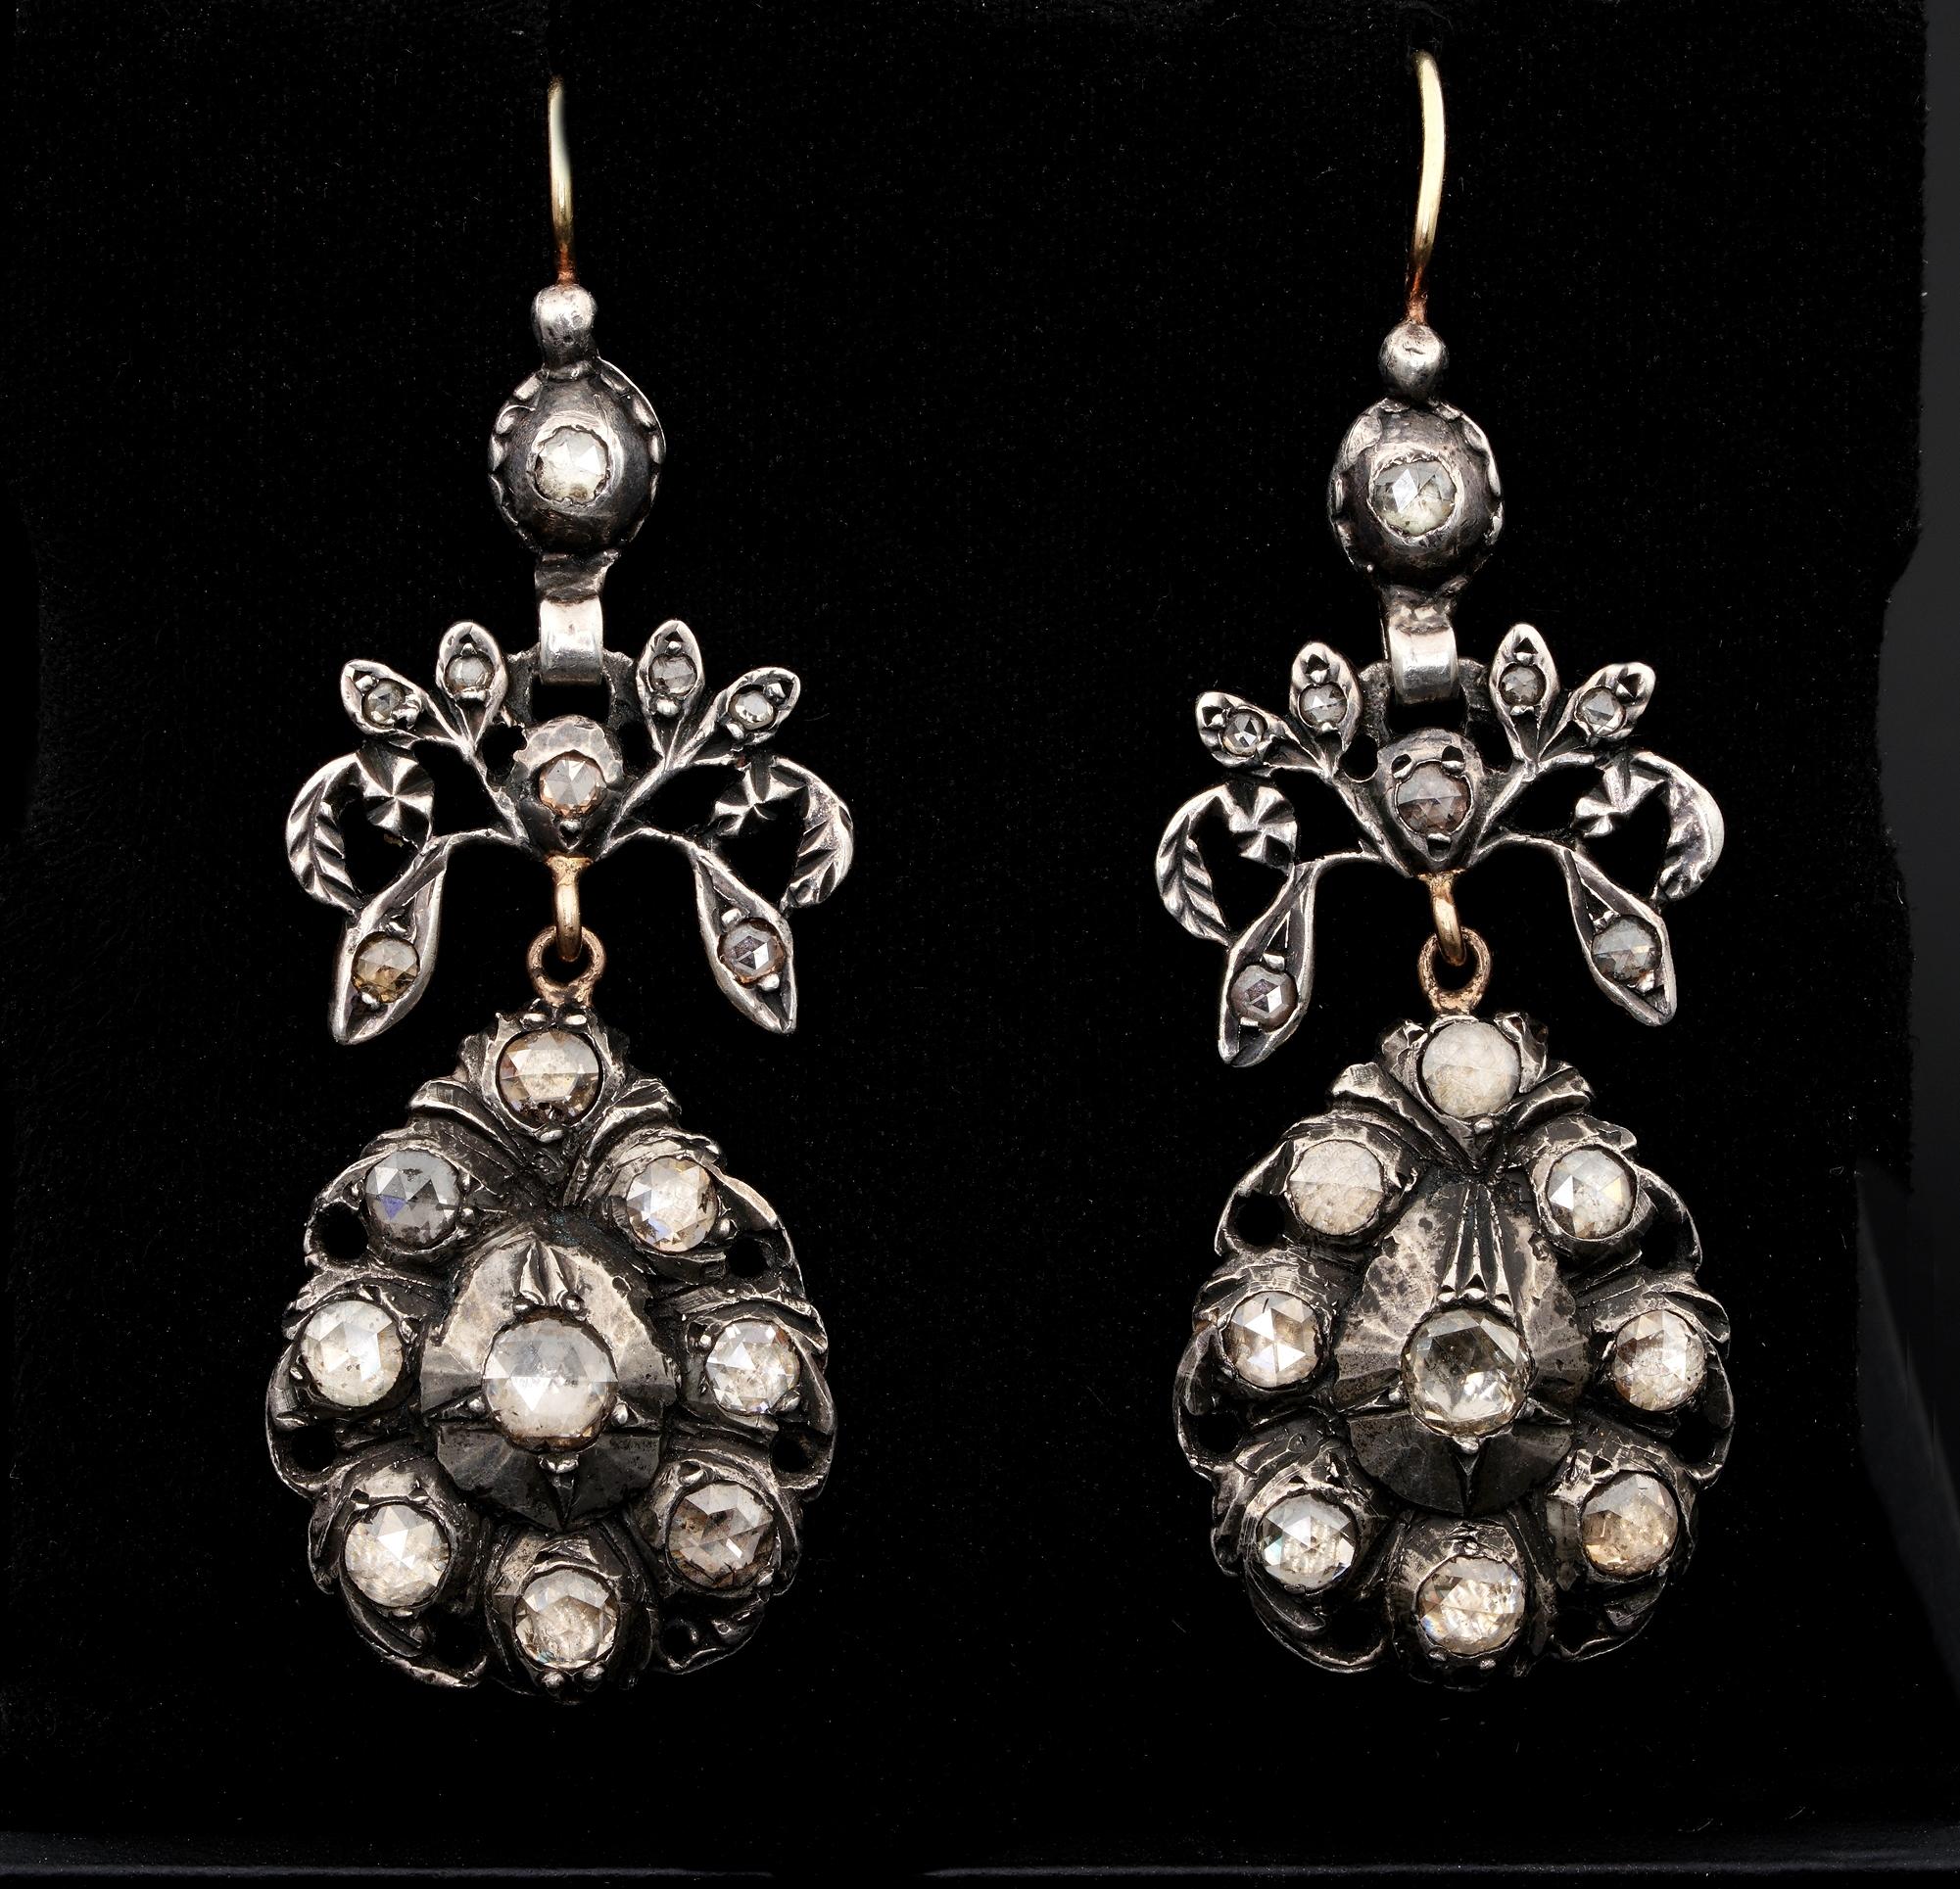 The Georgian Girandoles
Antique pair of Georgian period girandoles ear drop earrings, 1790 ca.
Hand crafted of solid silver mainly with little gold portions
Beautiful artwork from the glorious Georgian masters with articulated main body crafted into